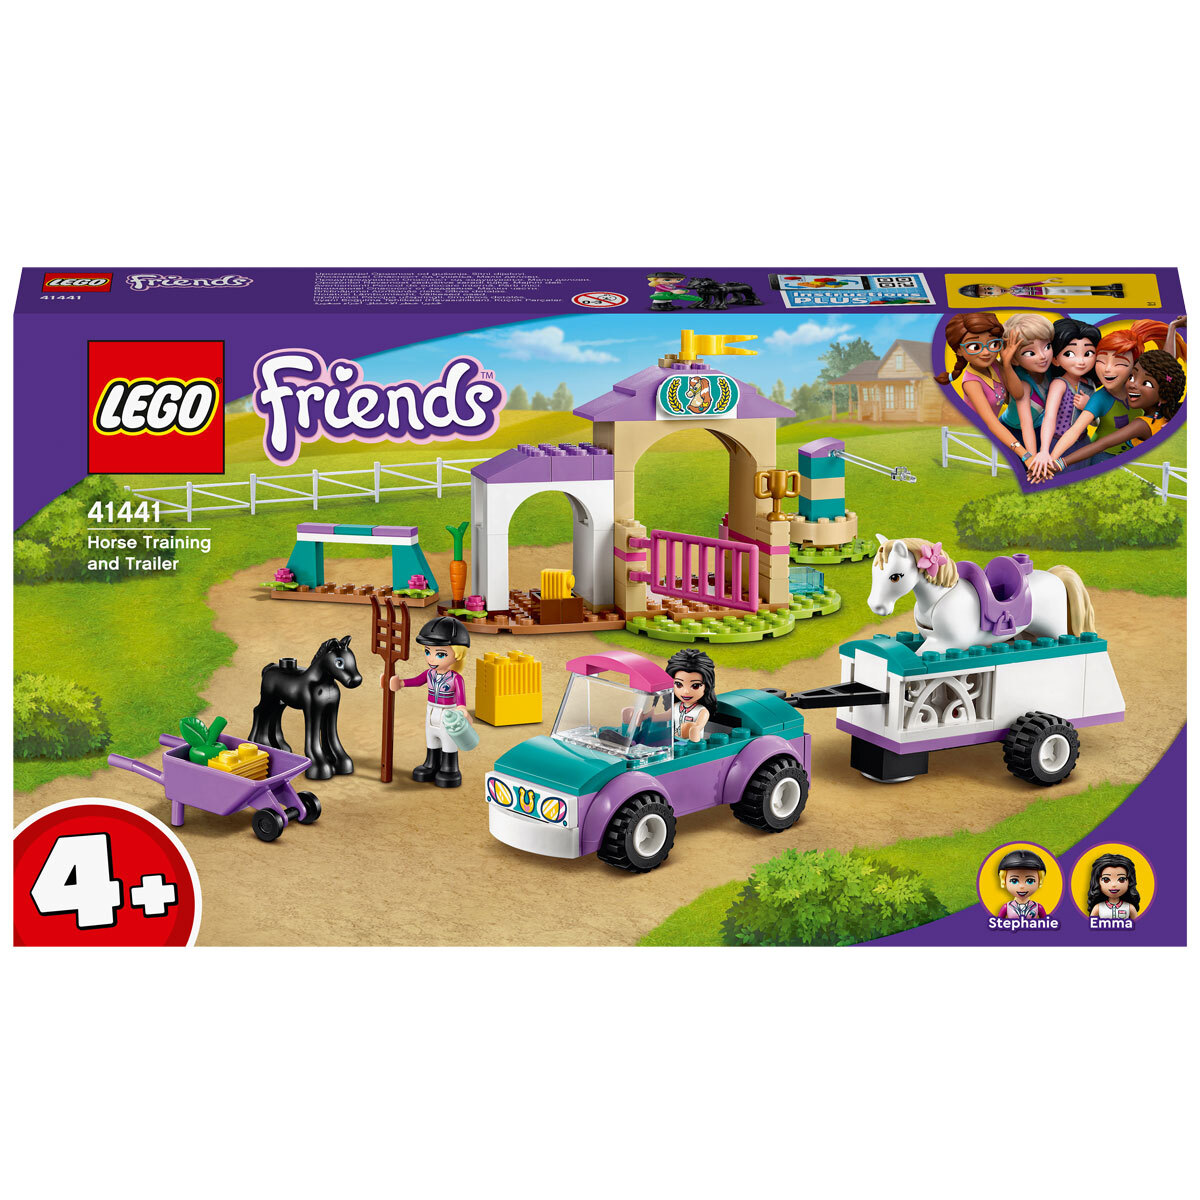 spor titel lotus LEGO Friends Horse Training and Trailer Toy 41441 | The Entertainer